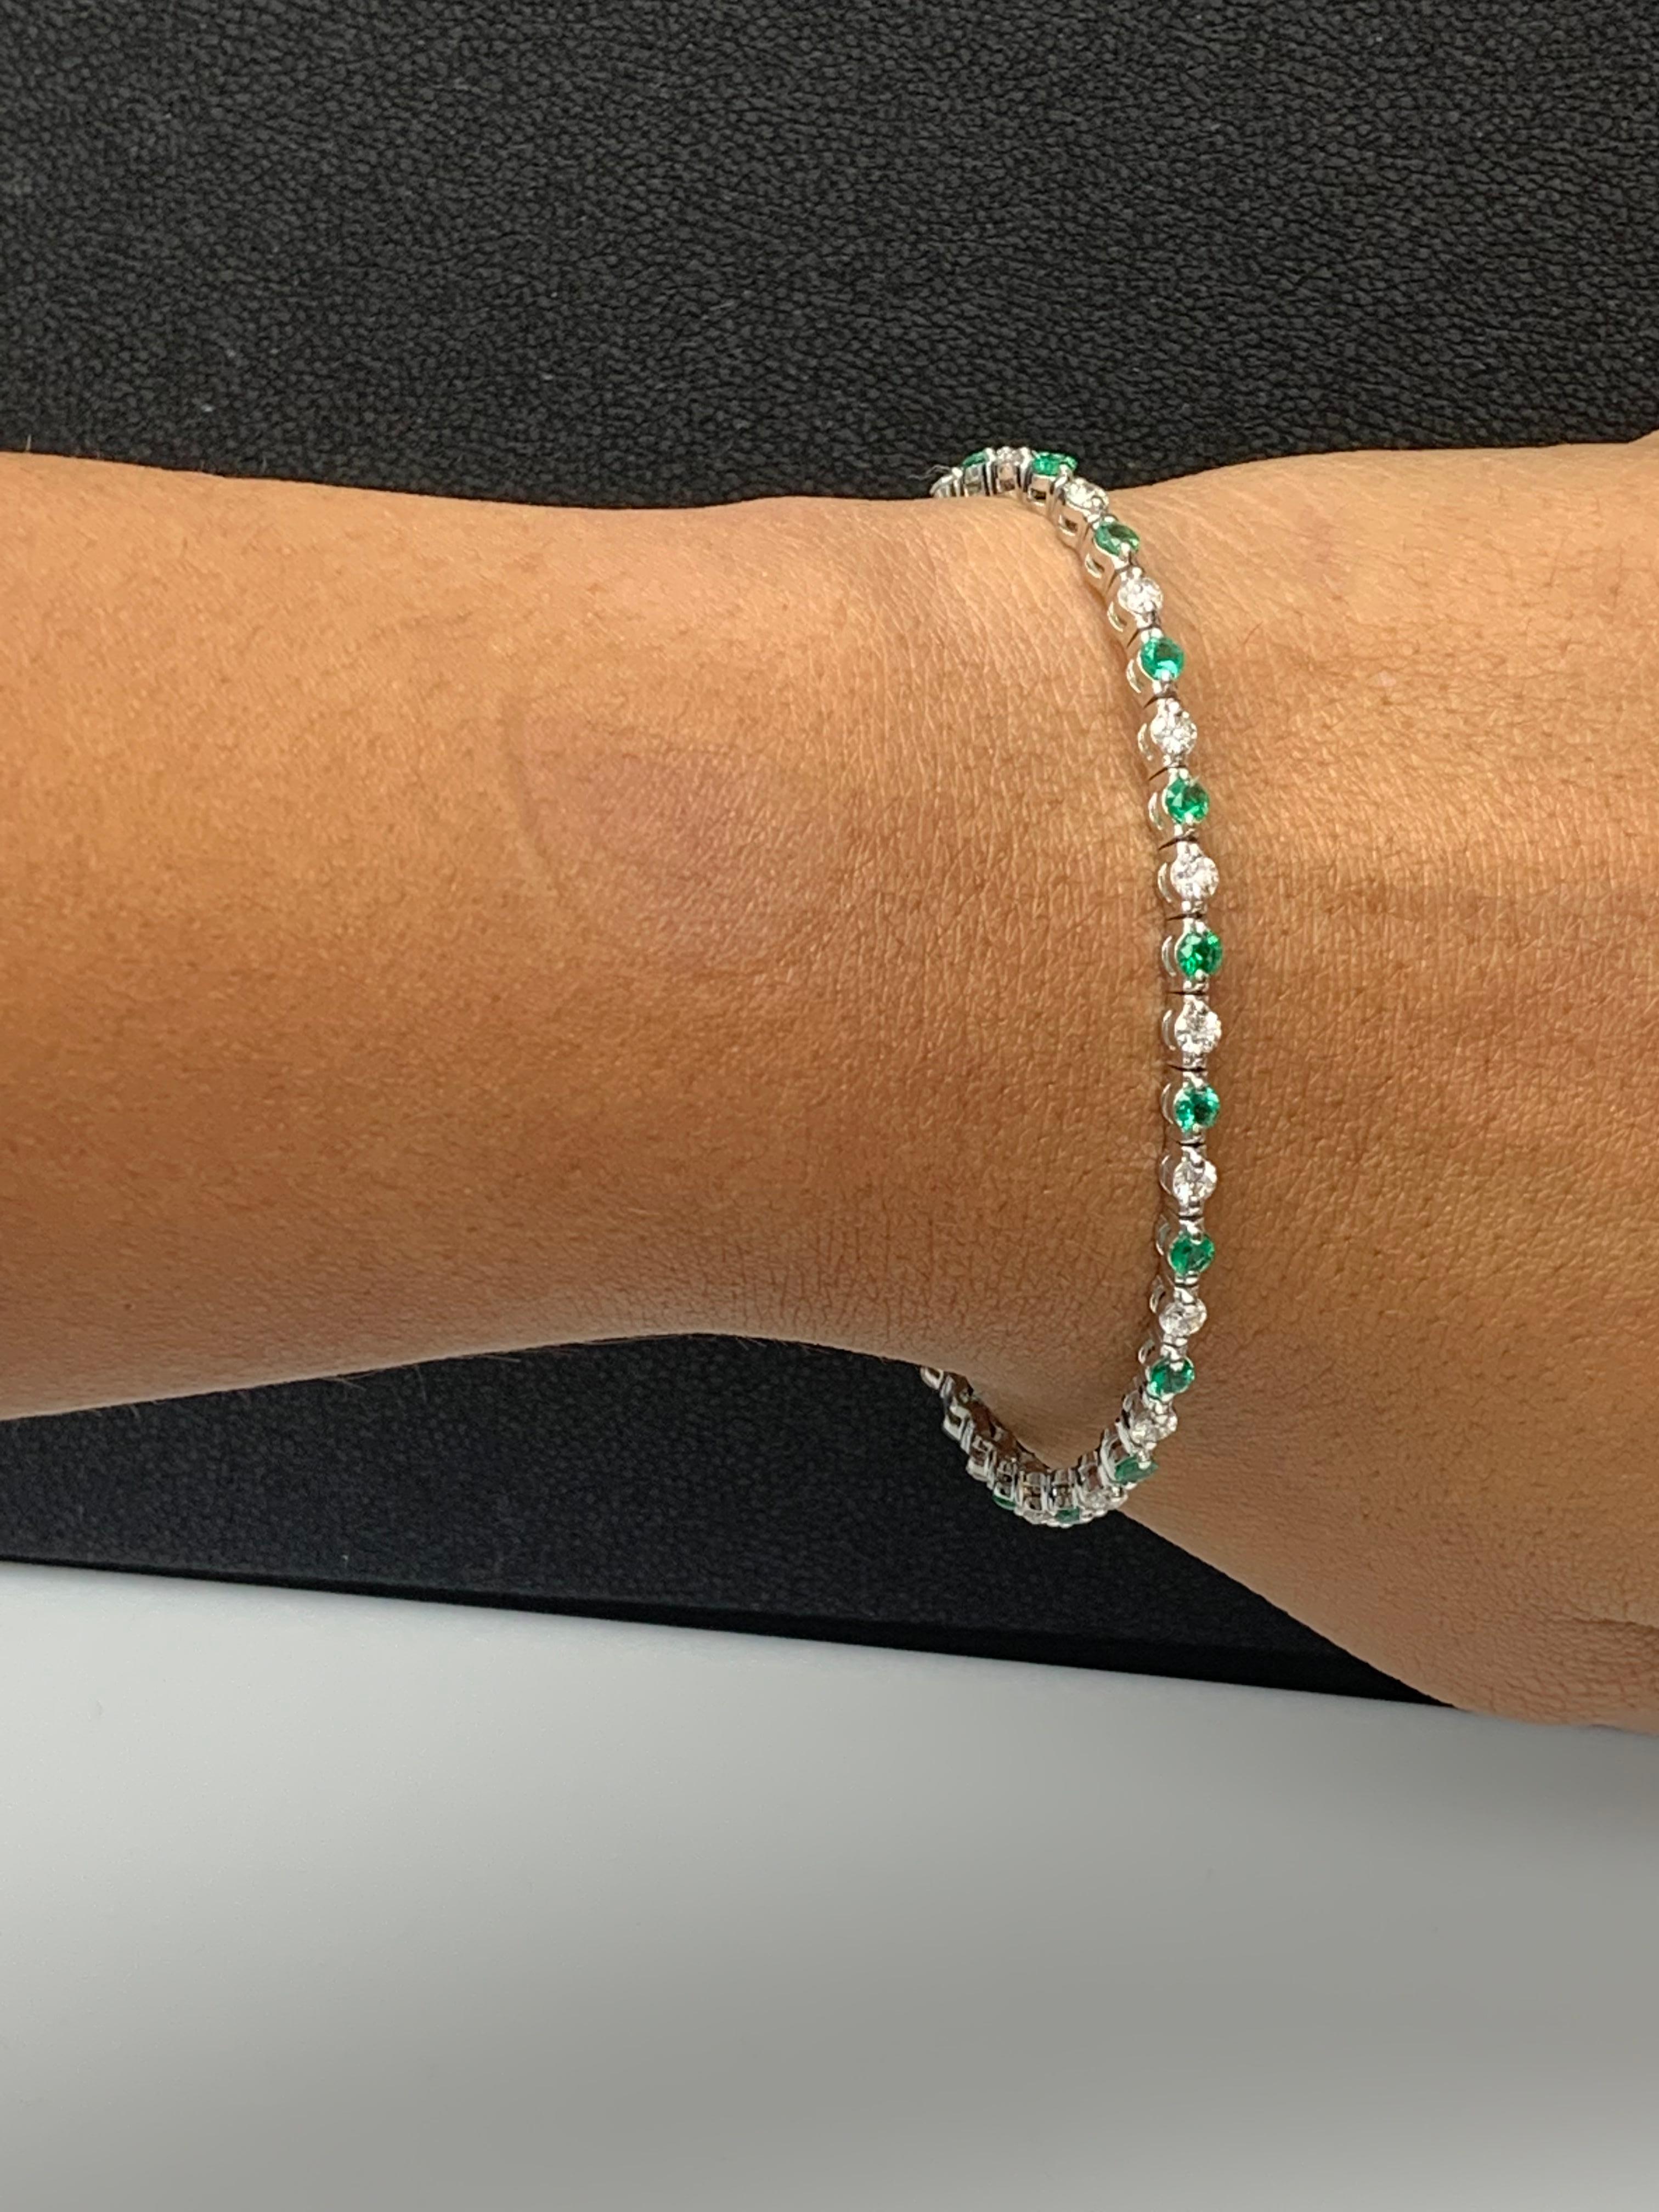 A stunning bracelet set with 21 Lush Green Emeralds weighing 2.24 carat total. Alternating these emeralds are 20 sparkling round diamonds weighing 1.60 carats total. Set in polished 14k white gold. Double lock mechanism for maximum security. A